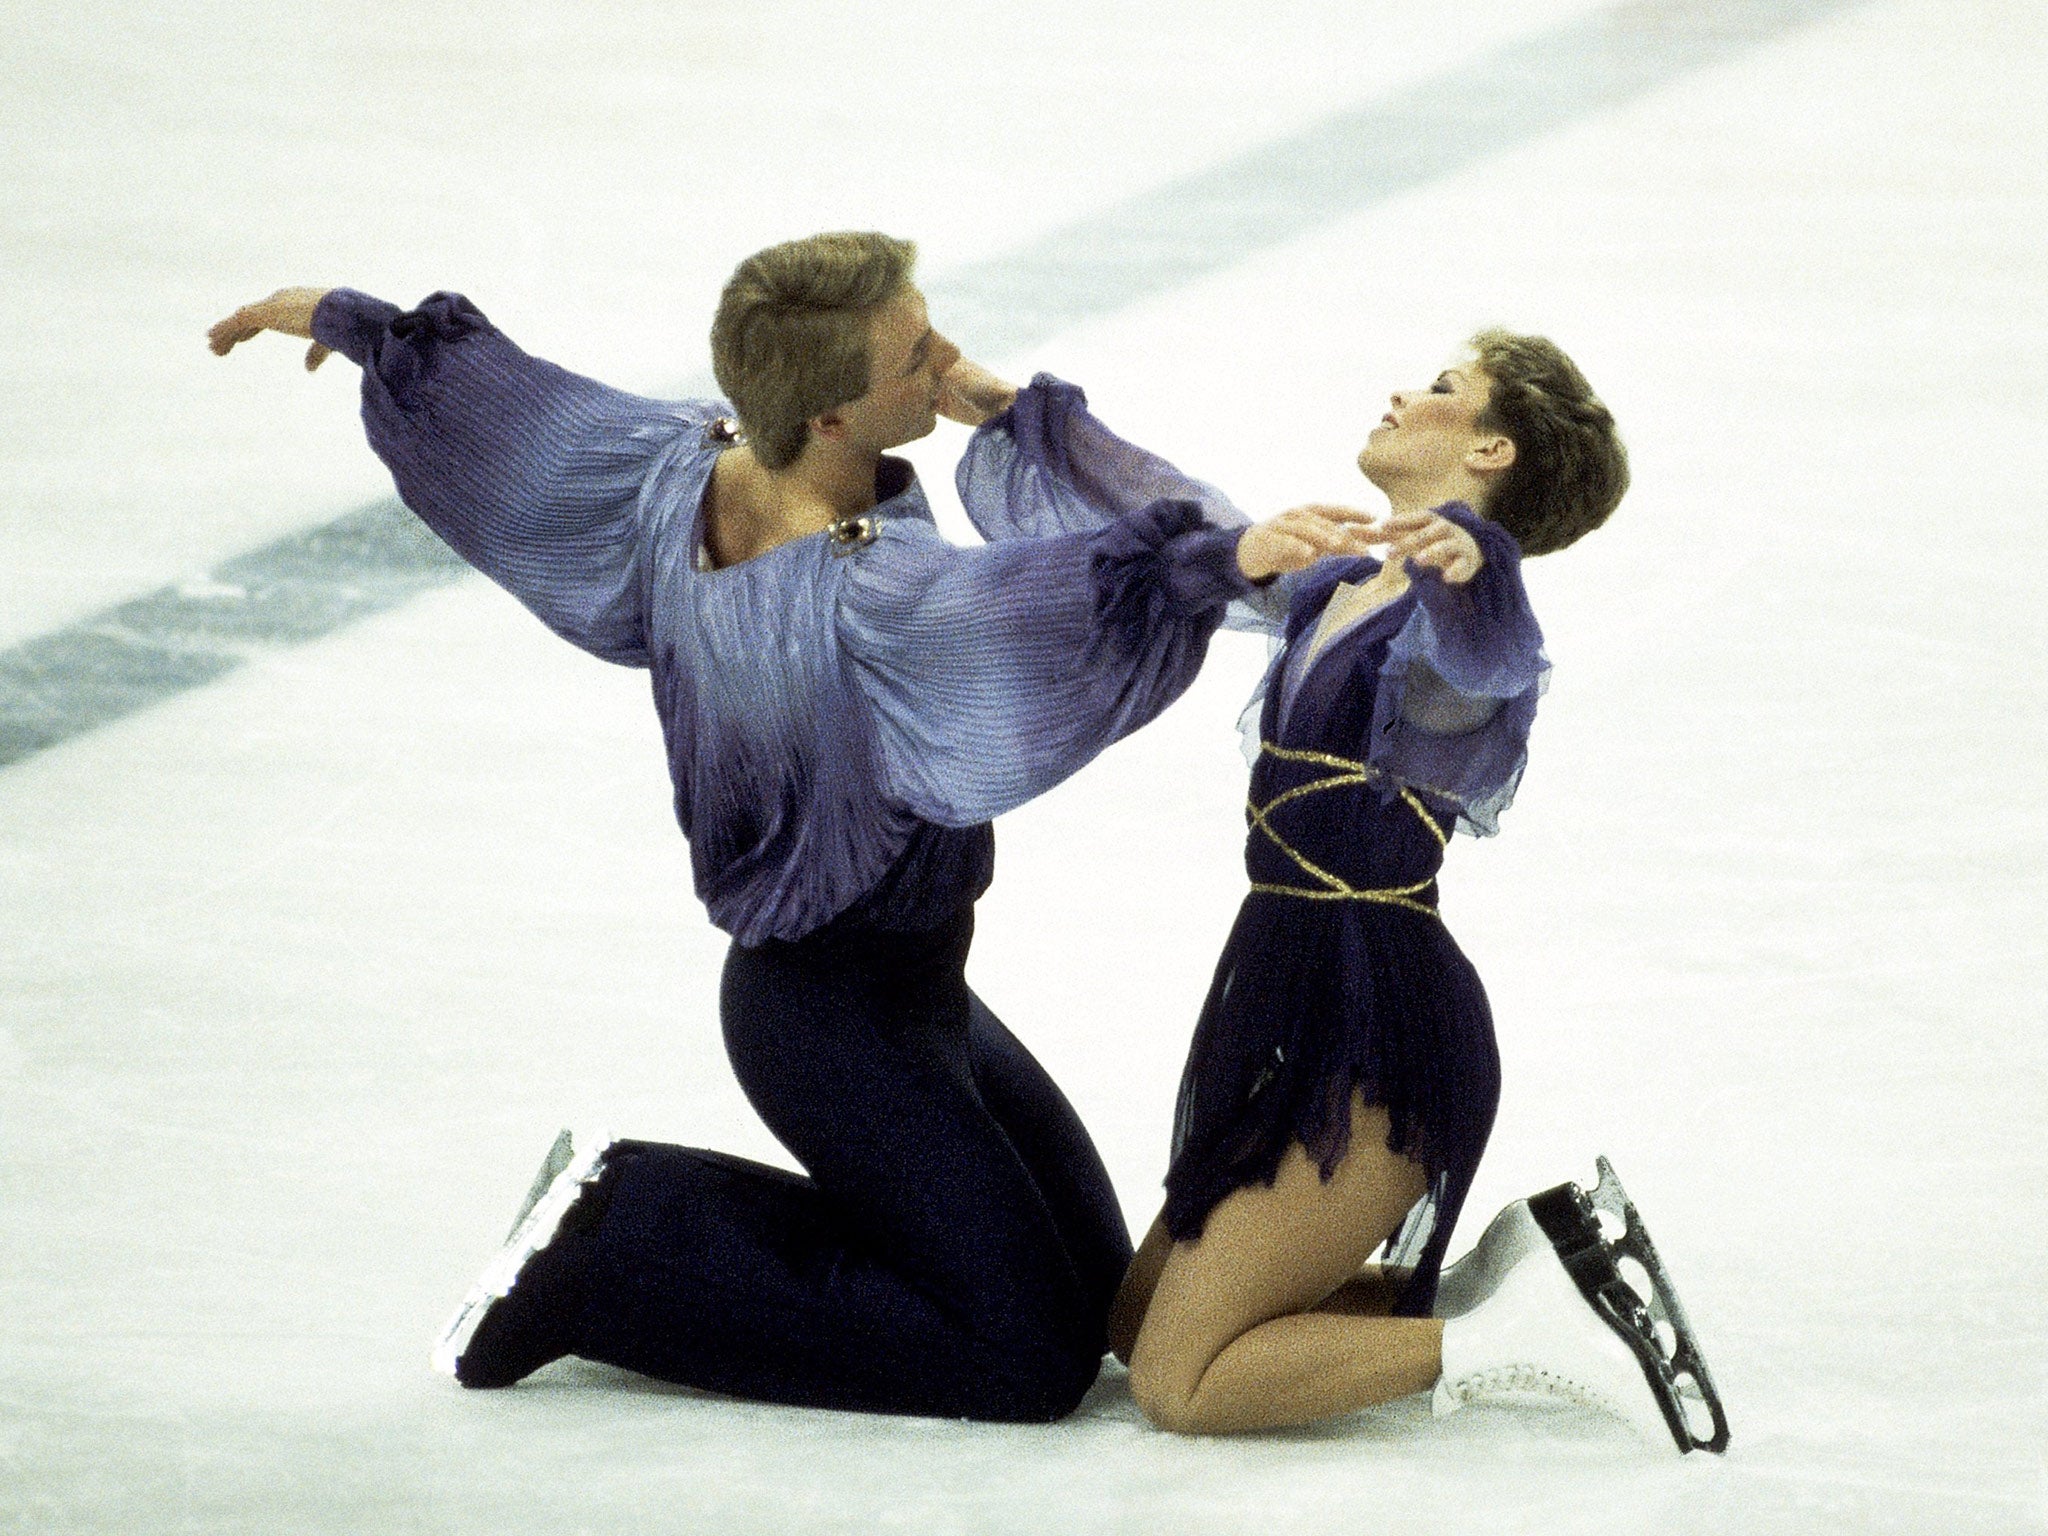 On a Valentine's evening in 1984, 24 million tuned in to see the British couple, Jayne Torvill and Christopher Dean score maximum points and crowned the Olympic ice skating champions after scooping gold in Sarajevo, Yugoslavia for their slow, sensuous per